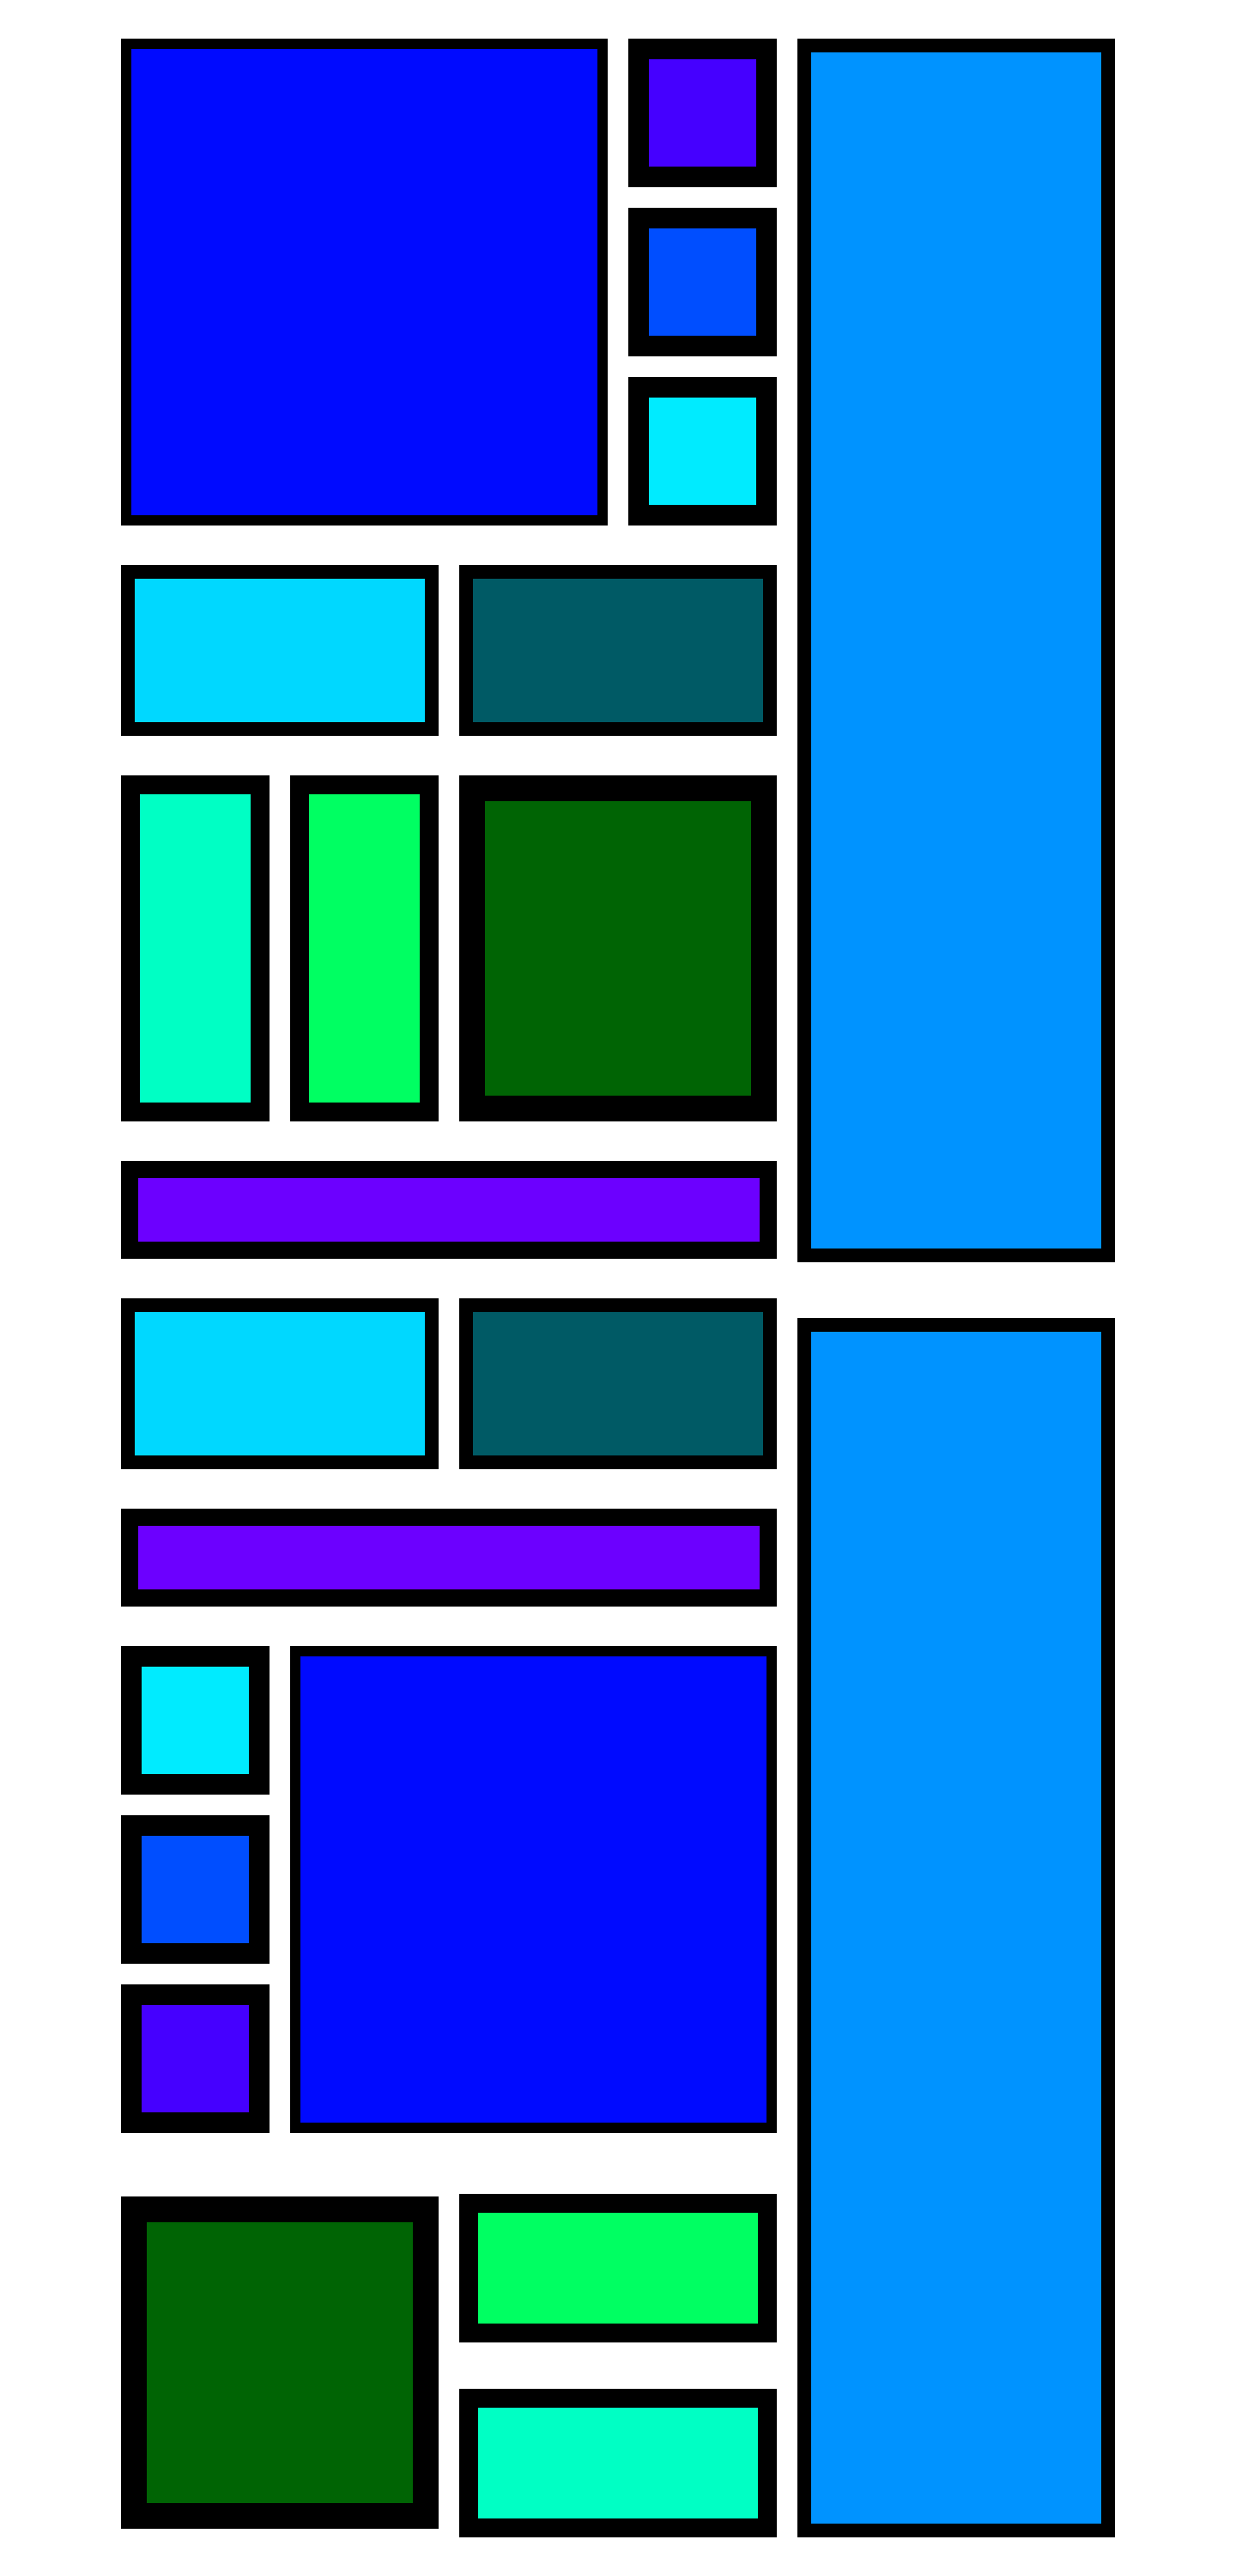 blue and green squares on a grid